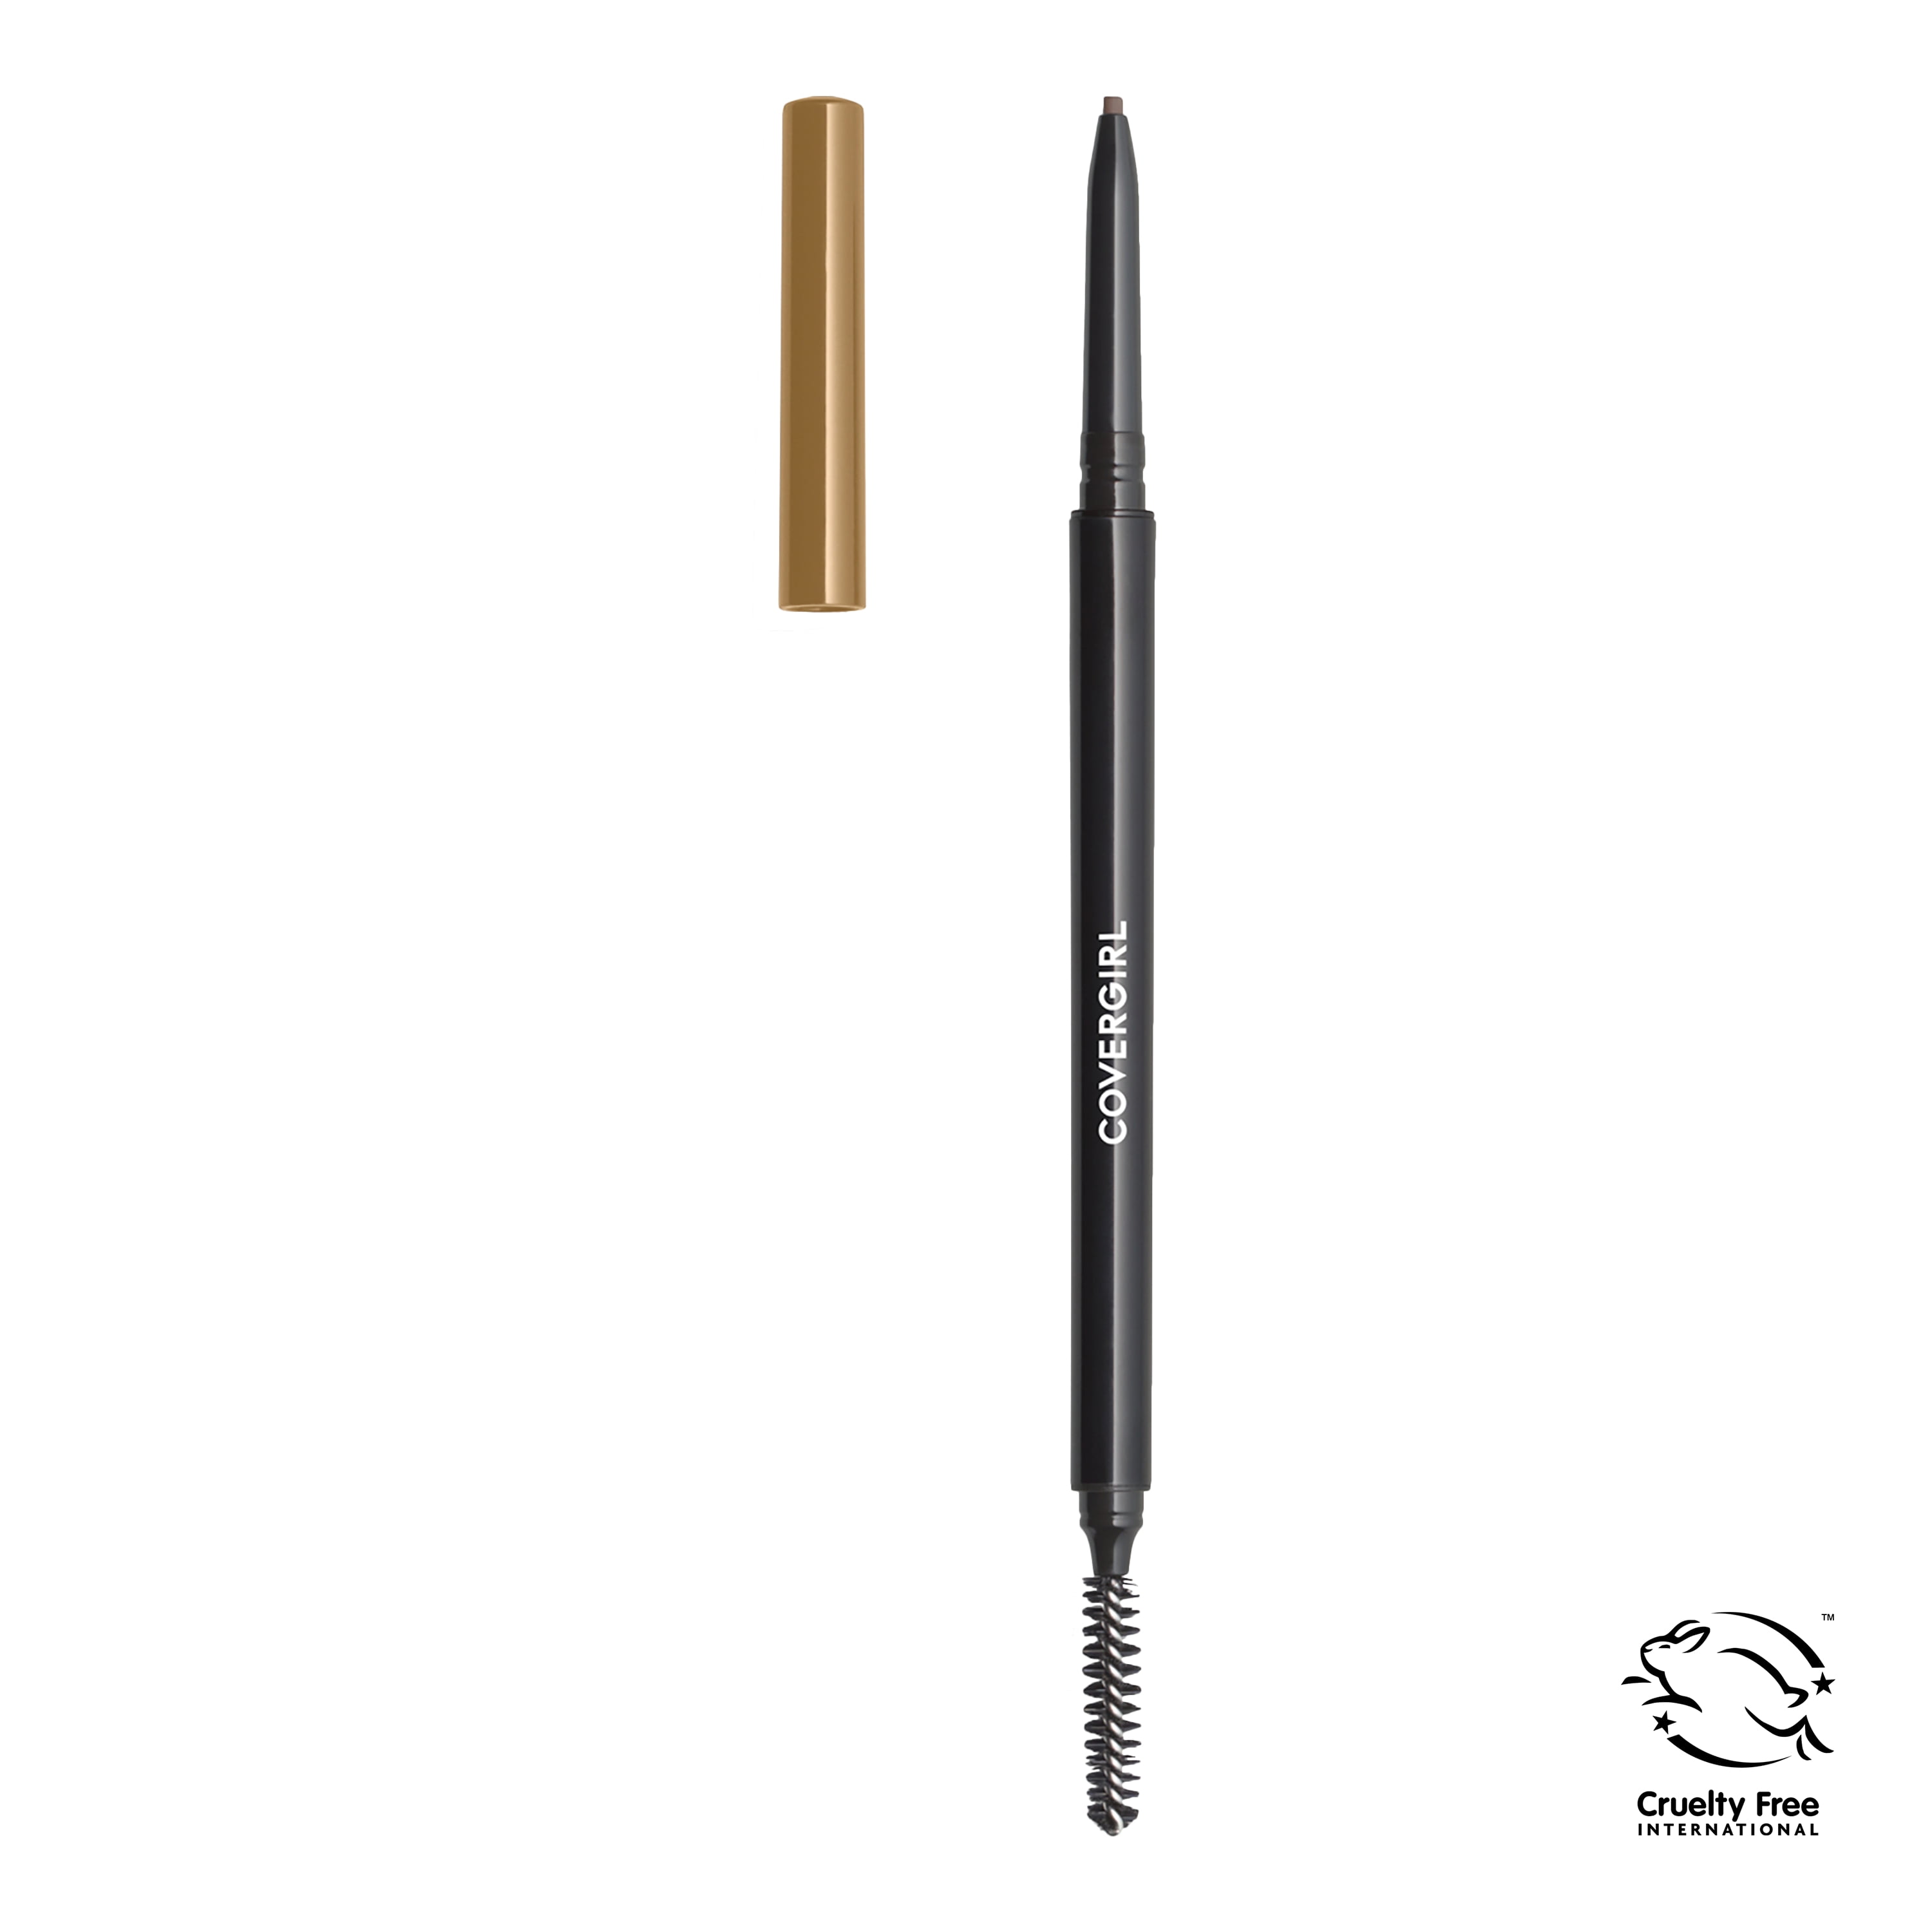 COVERGIRL Easy Breezy Brow Micro-Fine + Define Pencil, 720 Soft Blonde, 0.003 oz, Brown Eyebrow Pencil, No Sharpening Needed, Built in Spoolie, Safe for Sensitive Eyes, Removes Easily